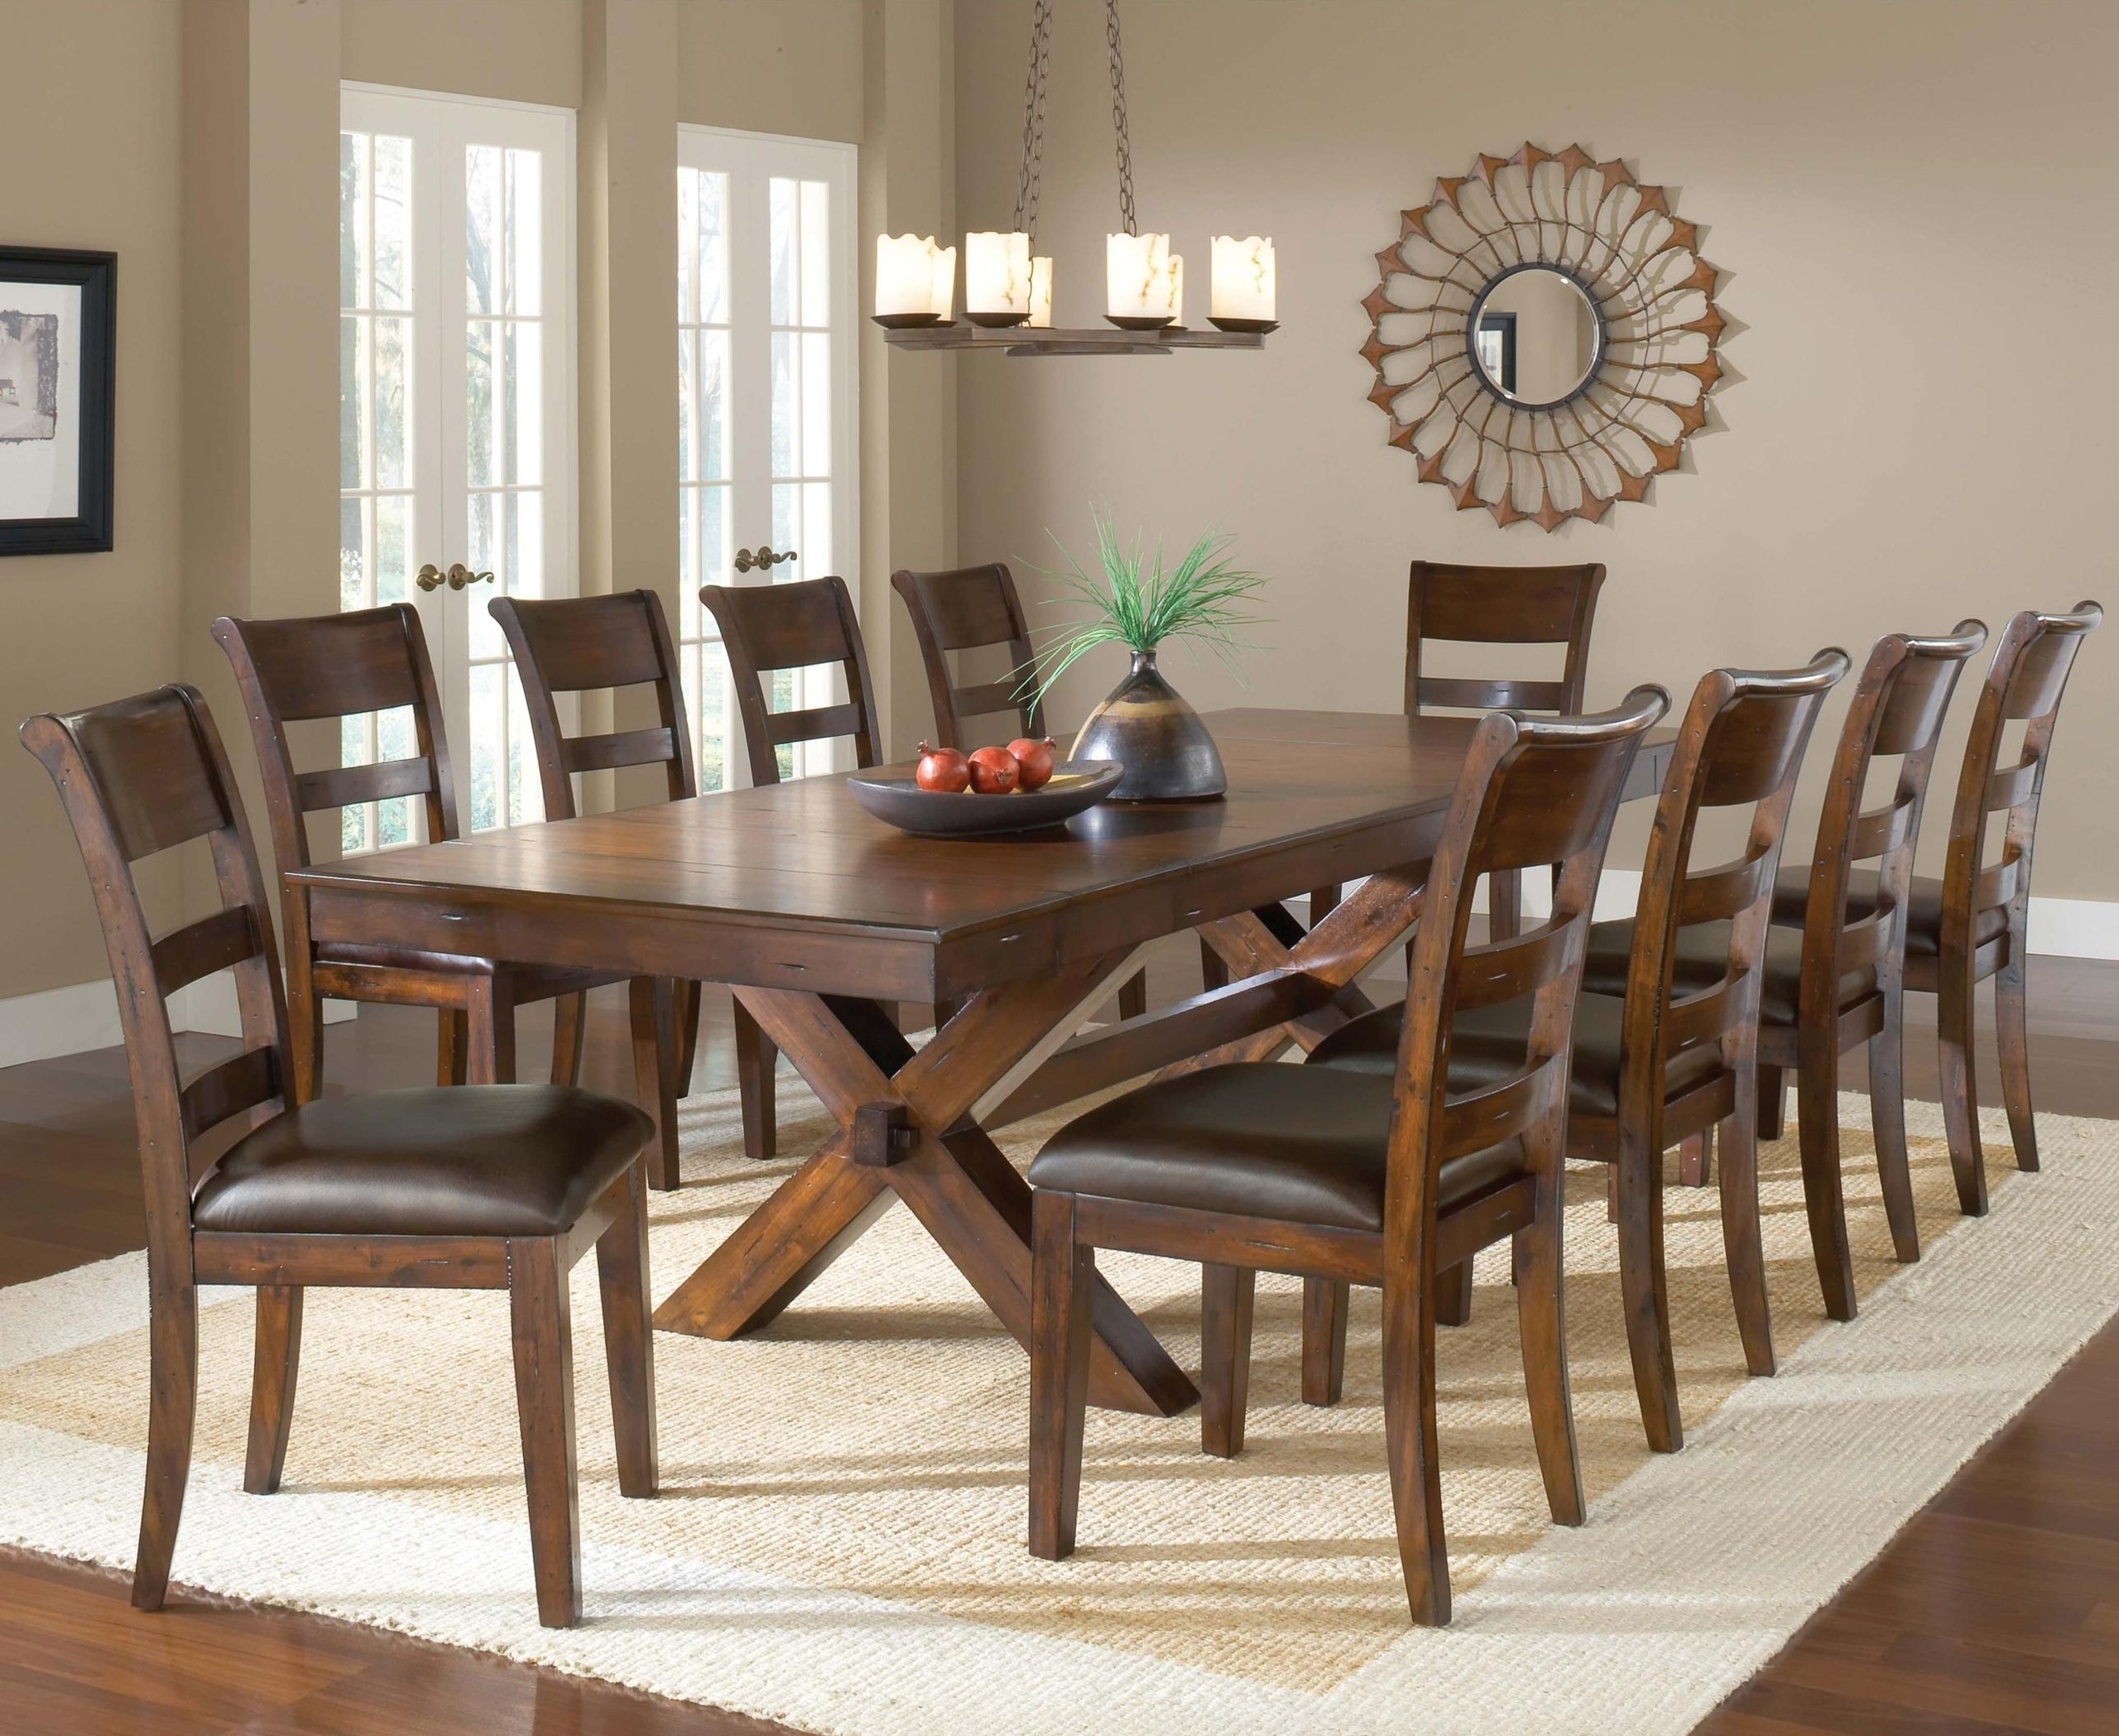 Large Dining Tables To Seat 10 Ideas On Foter